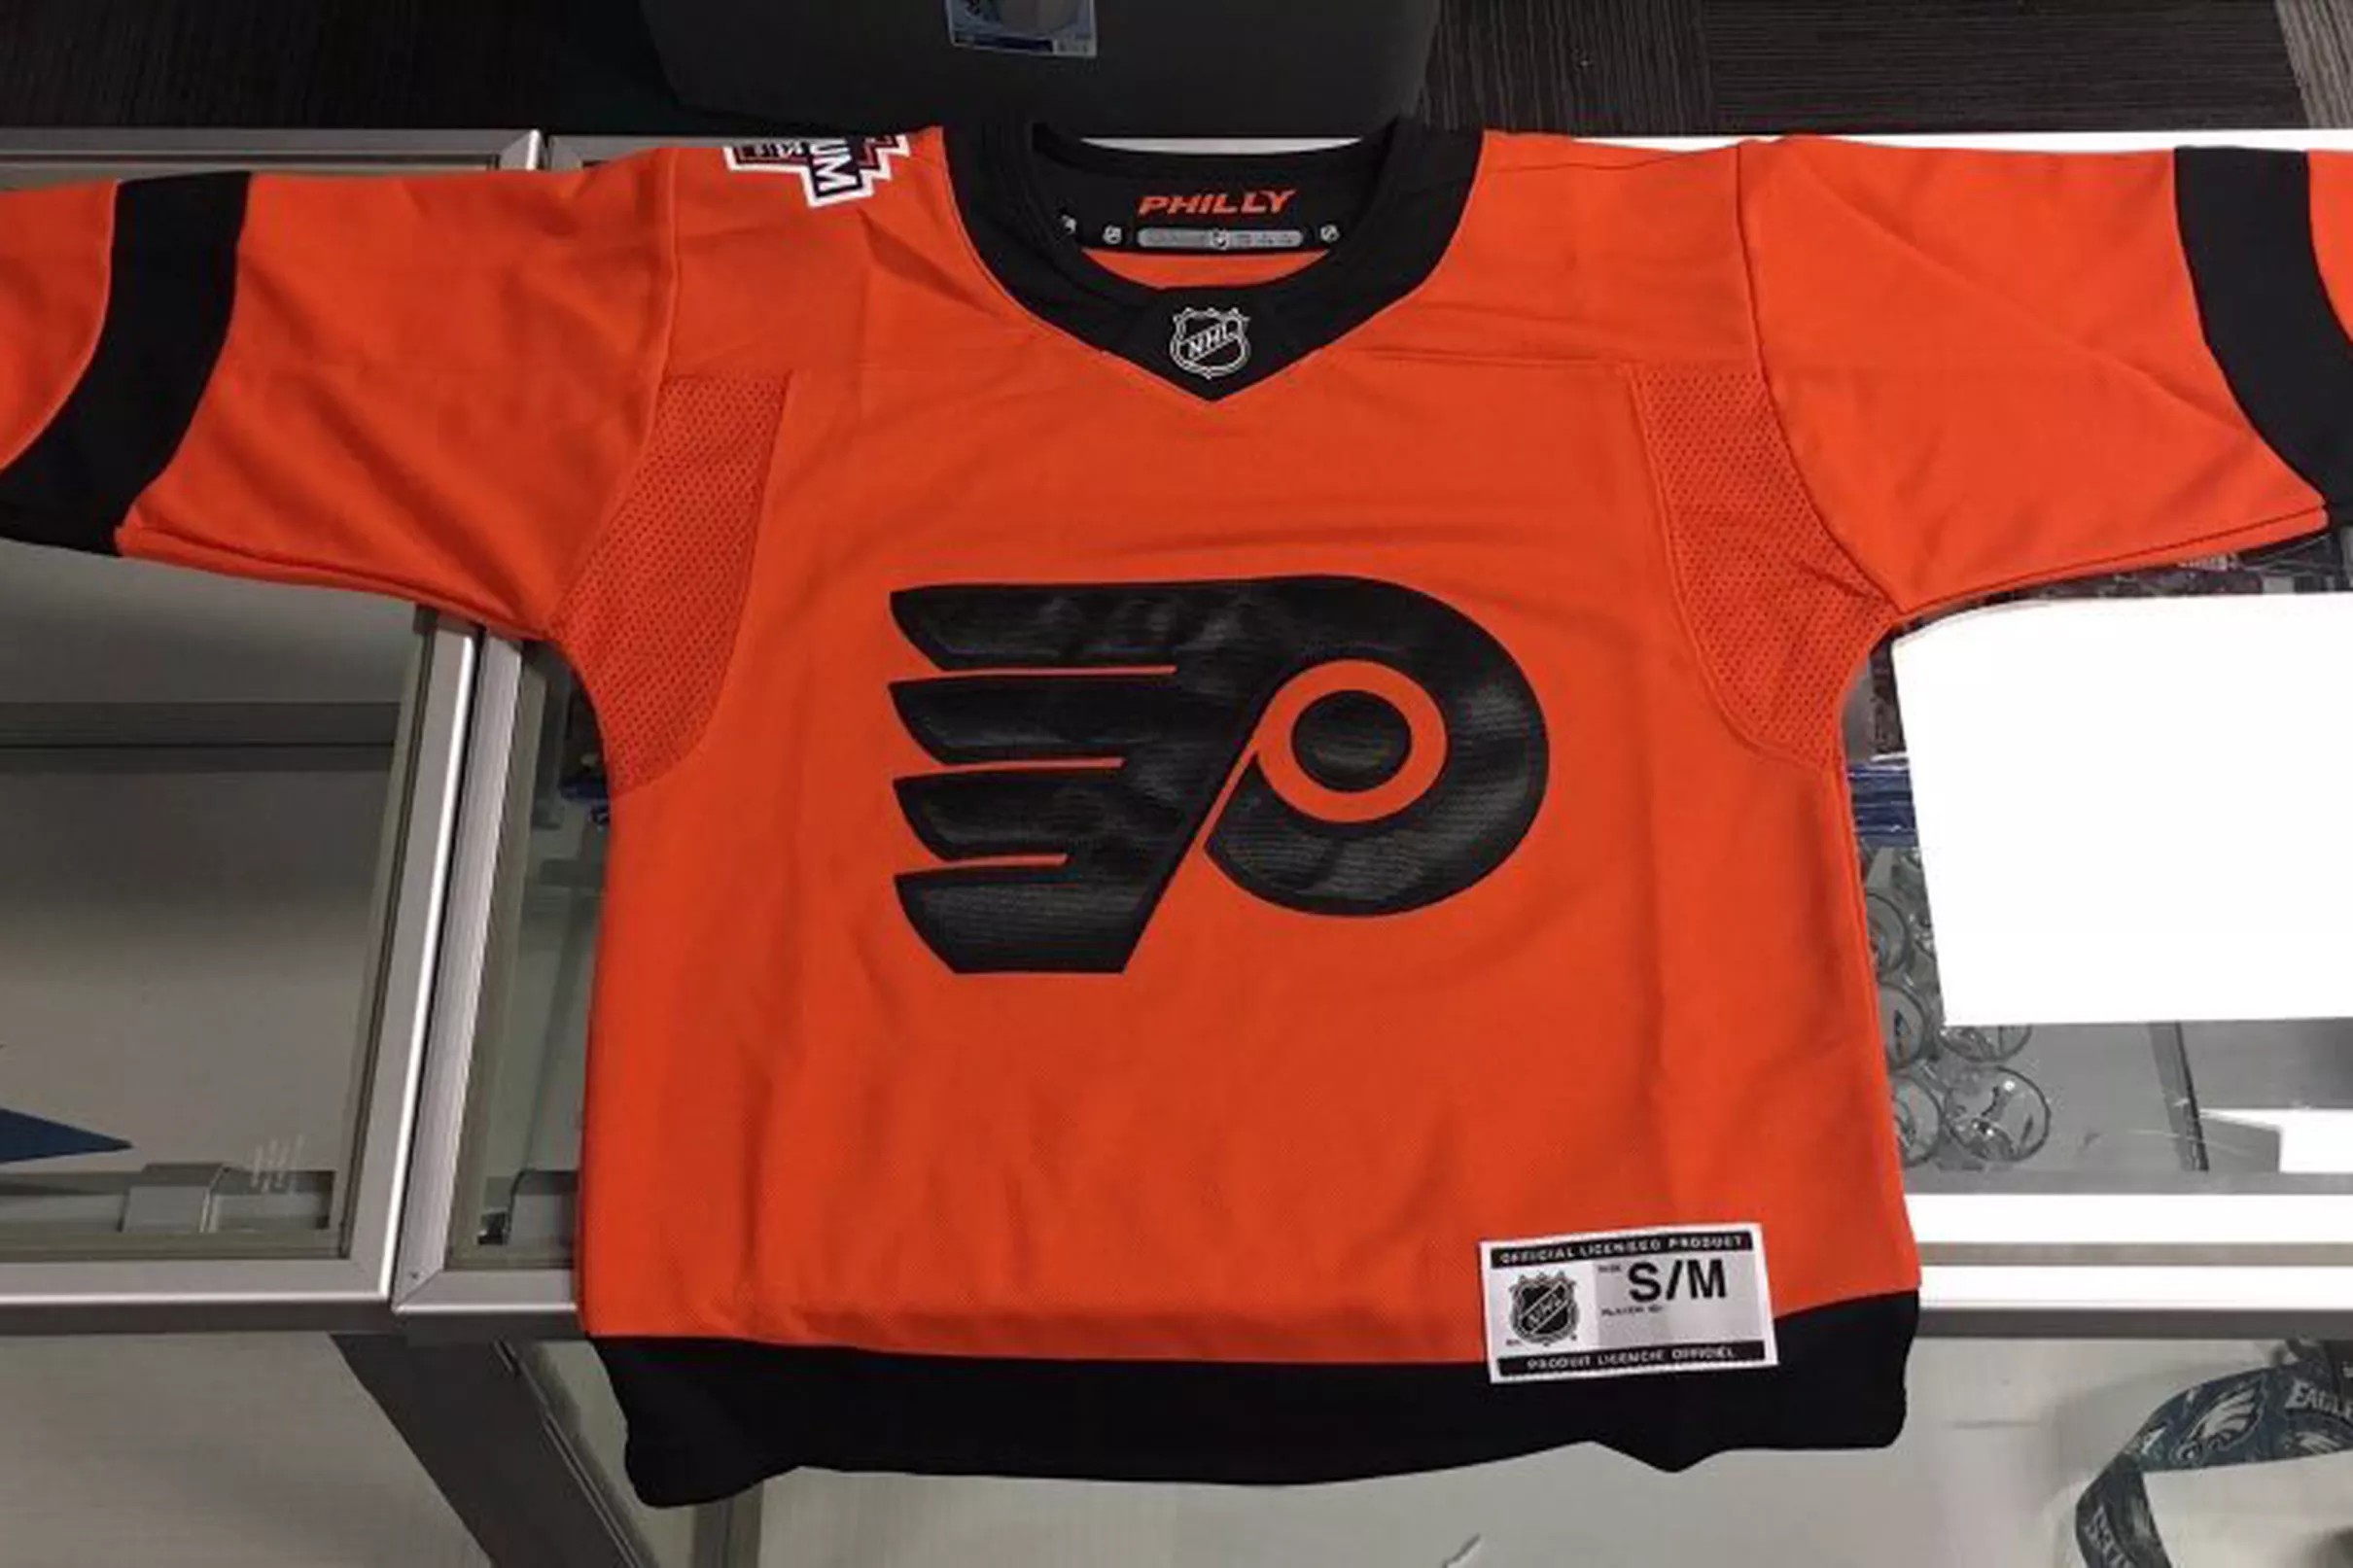 The Flyers’ 2019 Stadium Series jersey may have been leaked